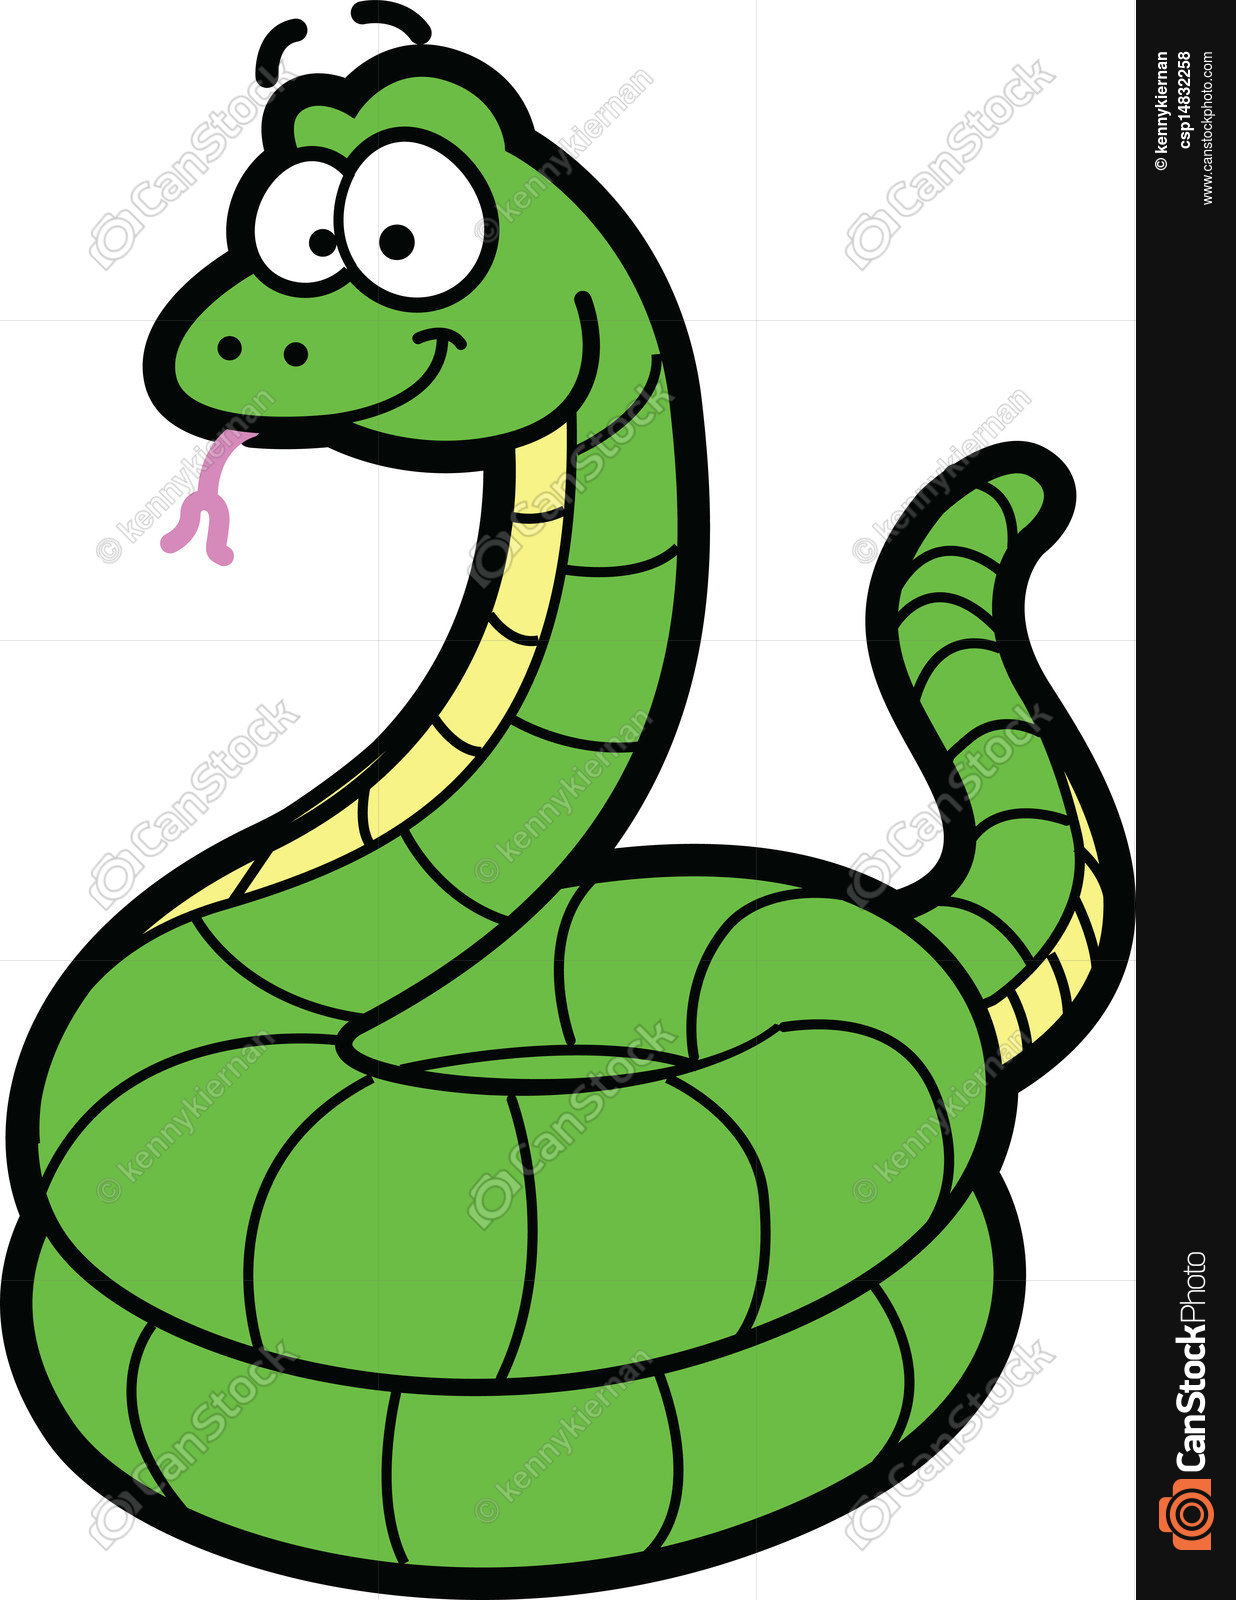 Happy smiling cartoon snake clipart vector - Search Illustration ...